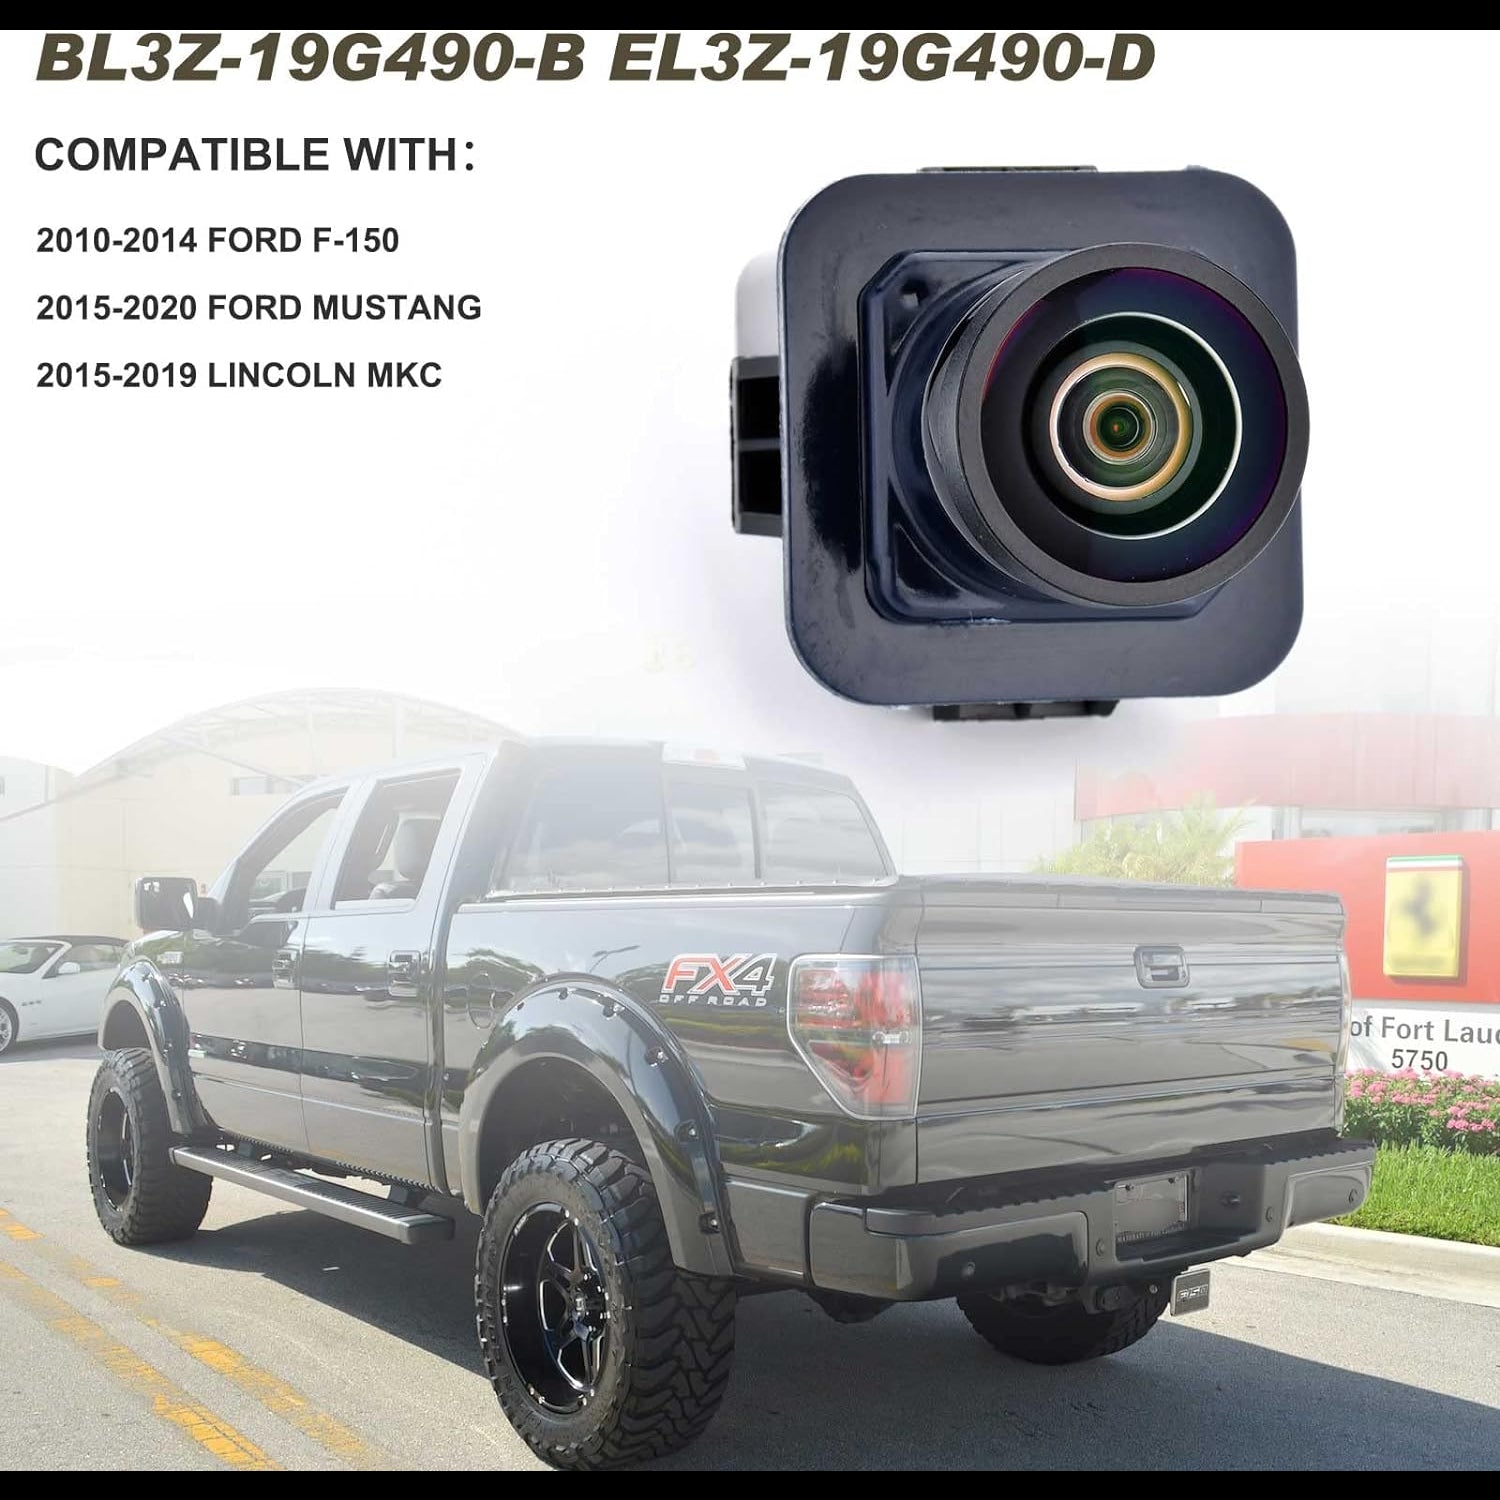 Backup Camera Compatible with Ford F150 2010 - 2014 Mustang 2015-2020 Replaces# BL3Z-19G490-B EL3Z-19G490-D